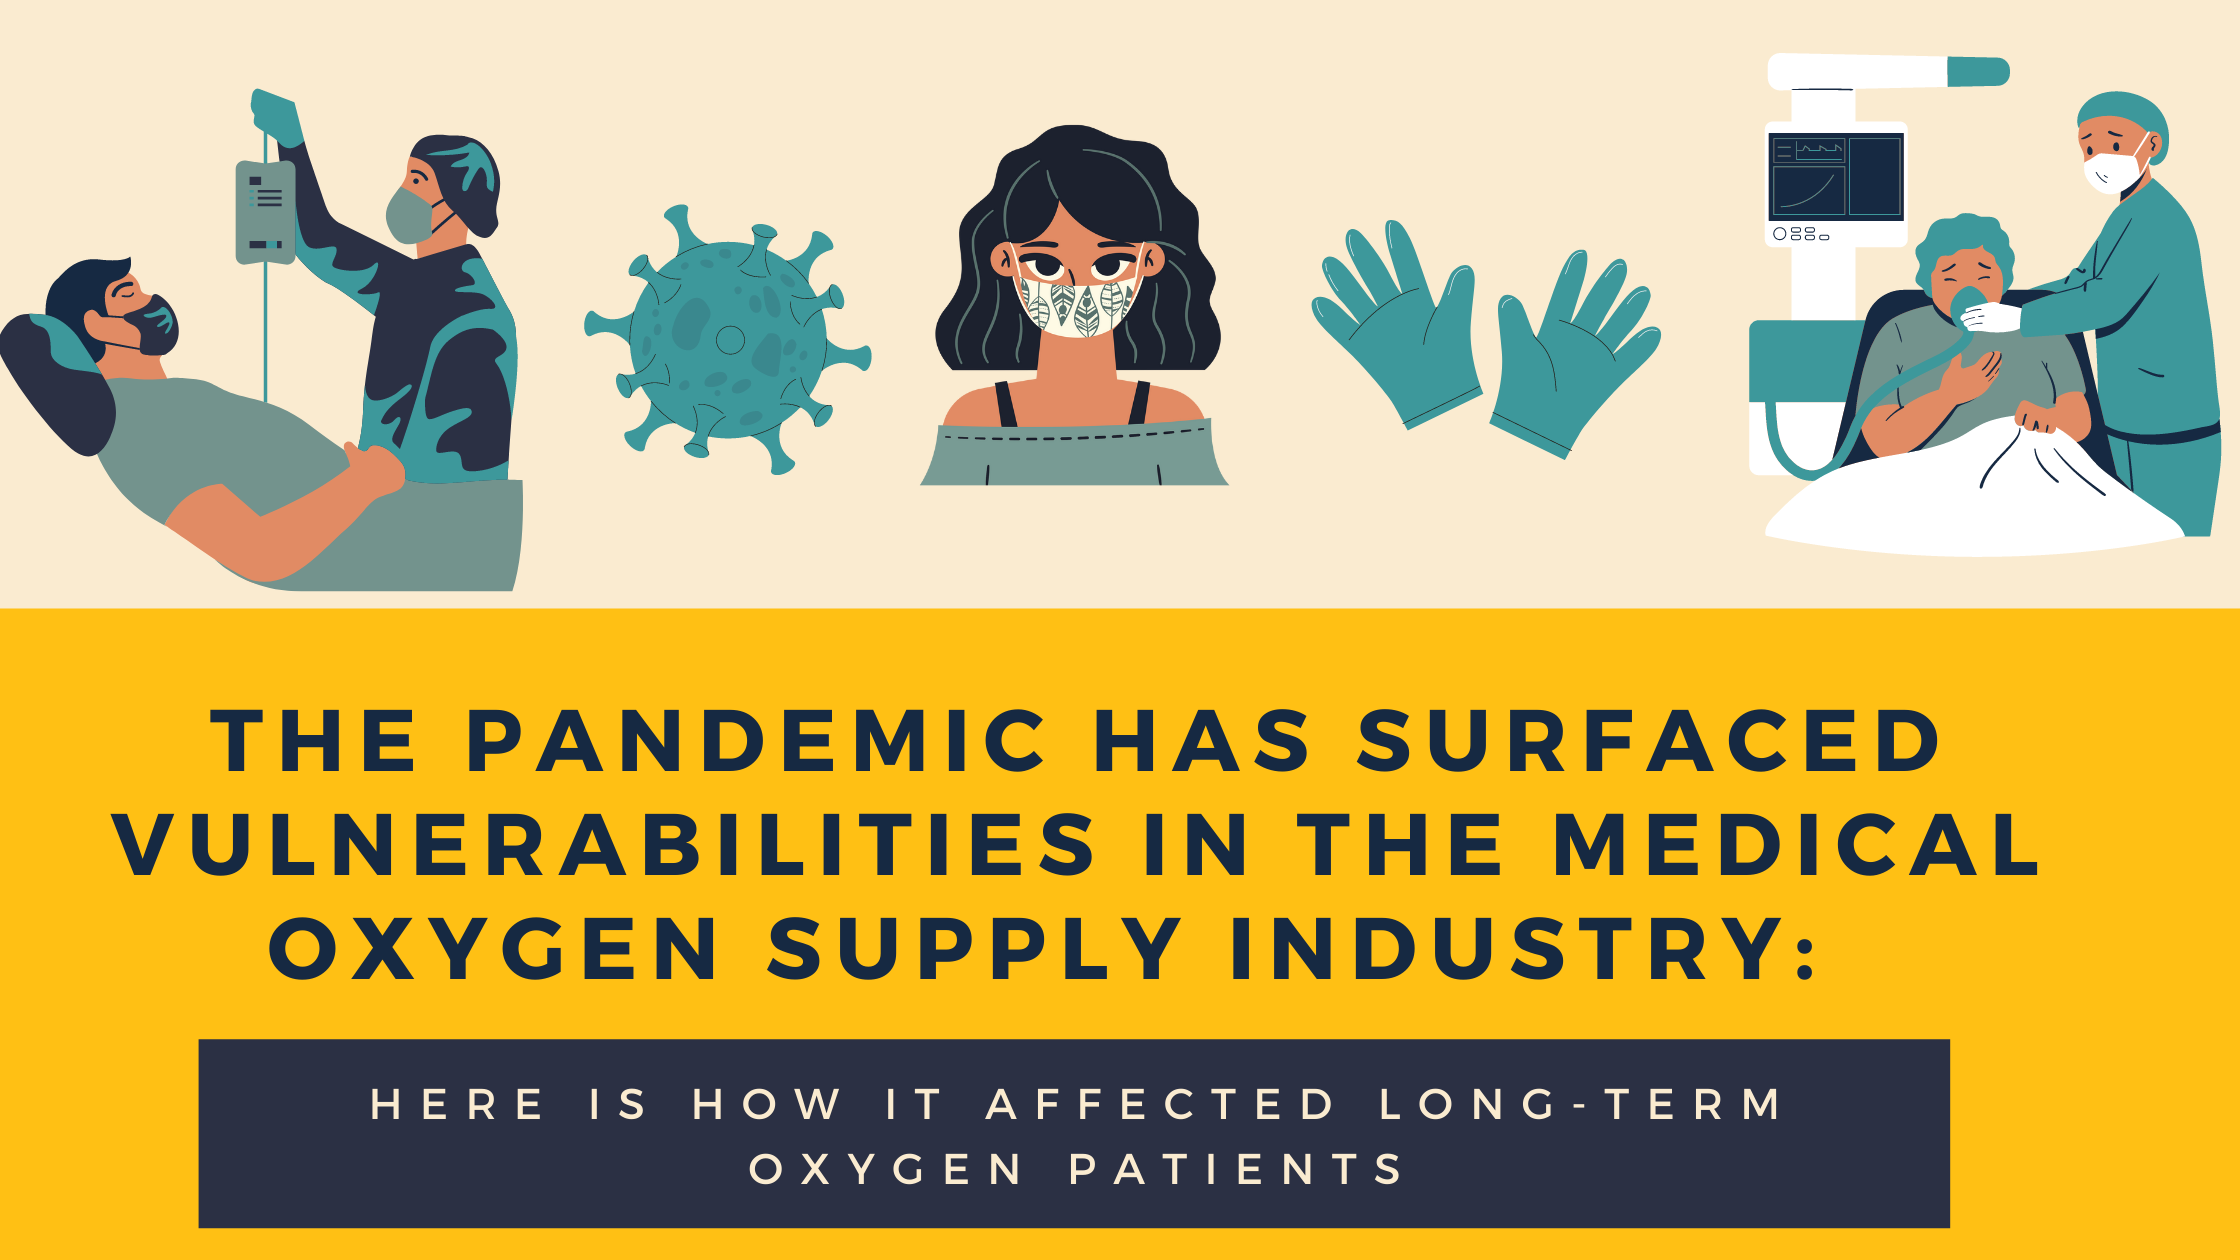 The Pandemic has Surfaced Vulnerabilities in Medical Oxygen Supply Industry